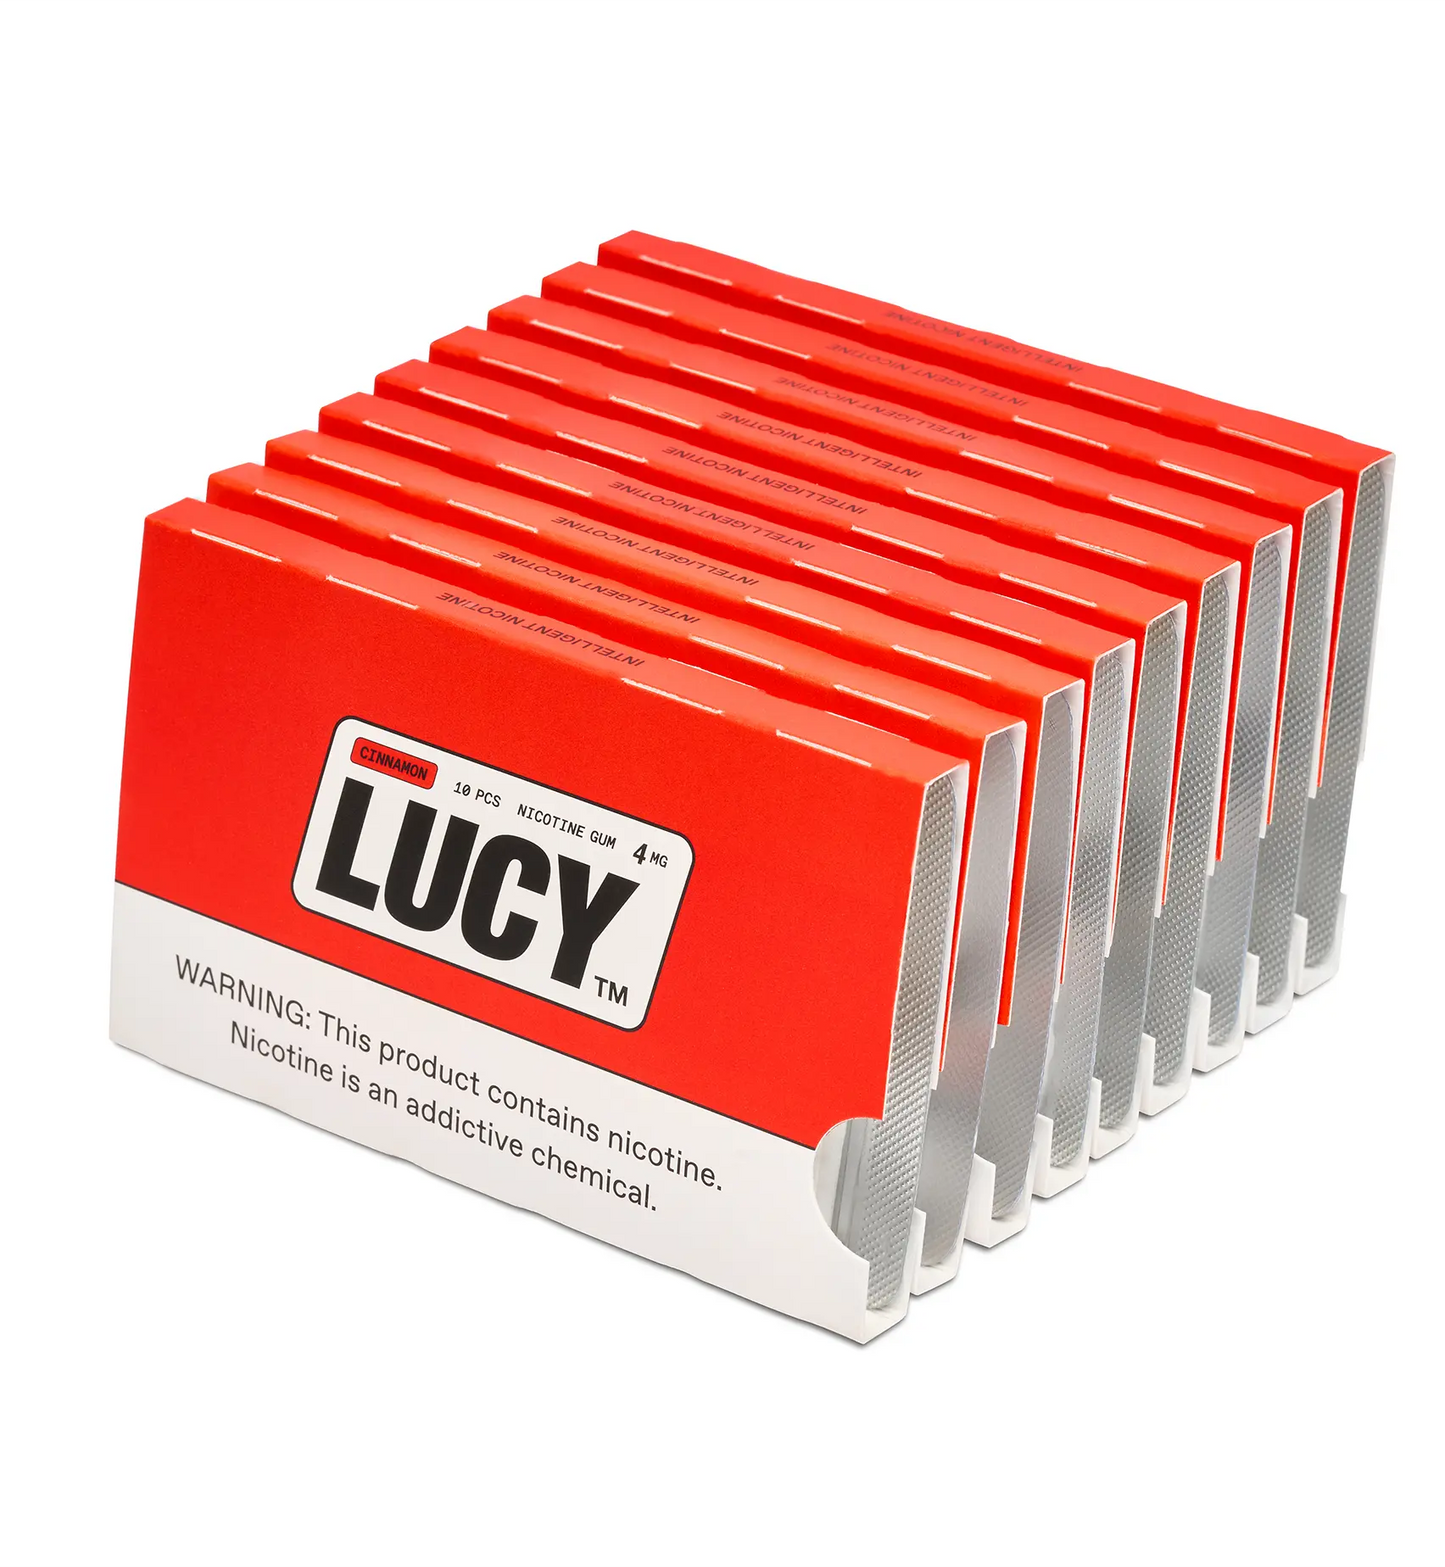 Lucy Nicotine Gum 4mg, 30 Count [Sample Pack], Nicotine Alternative - High  Purity, Take On-The-Go, Delivers Pure 4 mg Nicotine | Contains Pomegranate